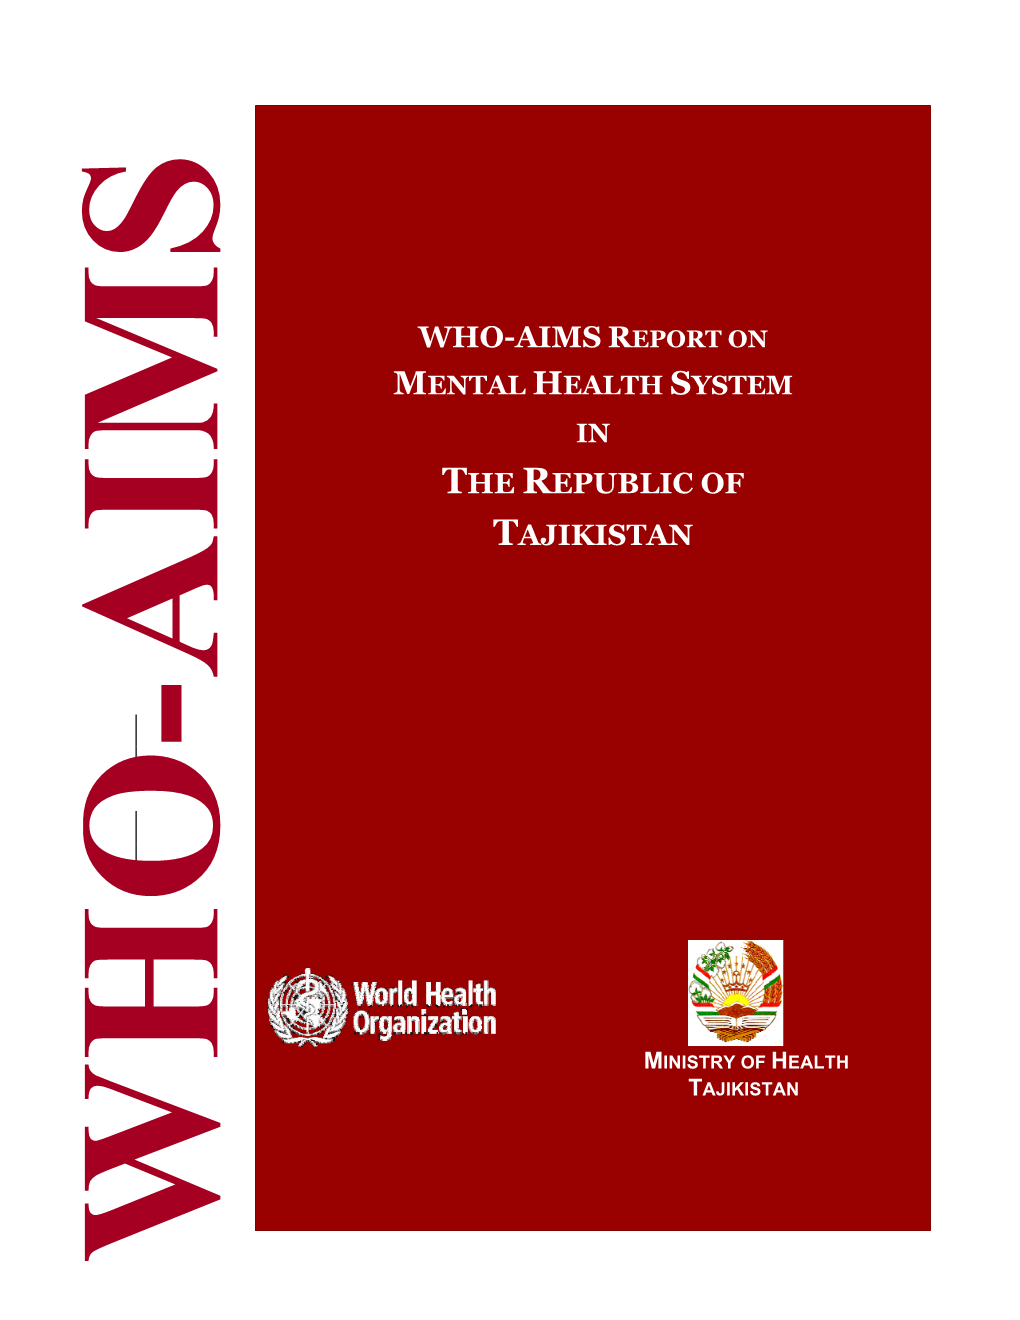 Who-Aims Report on Mental Health System in the Republic of Tajikistan